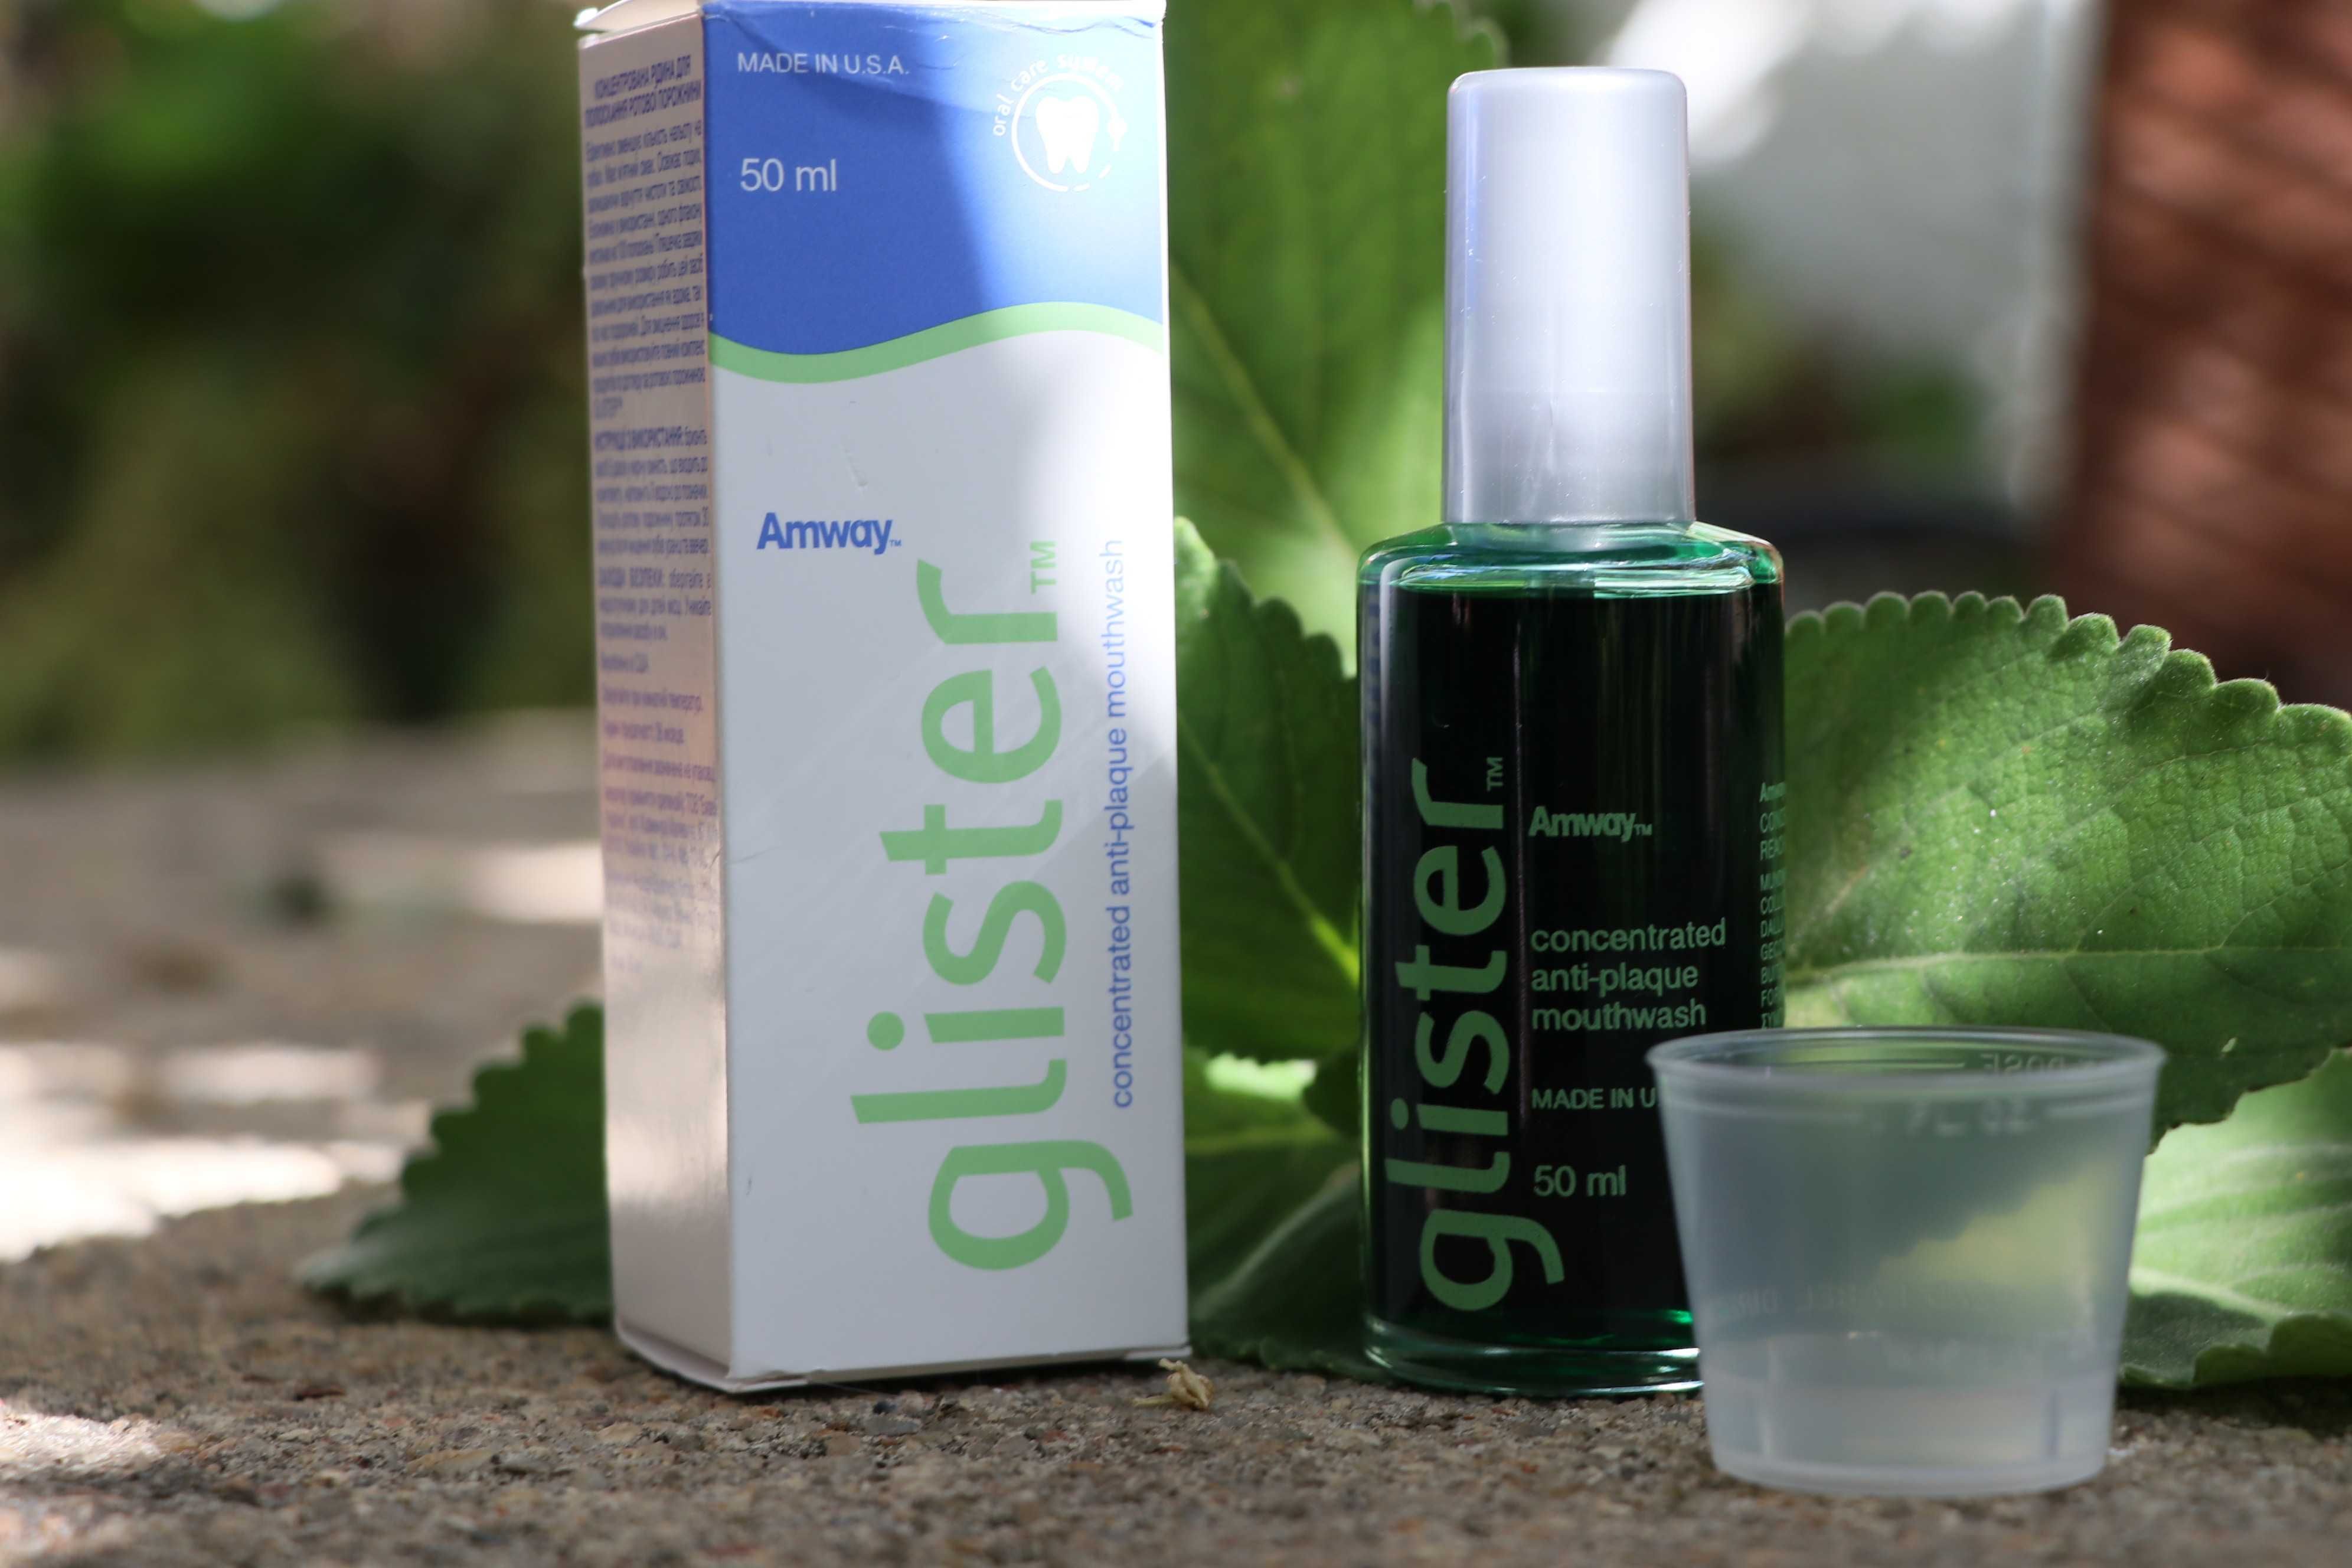 Amway Glister 50ml Concentrated Multi Action oral Mouthwash organic